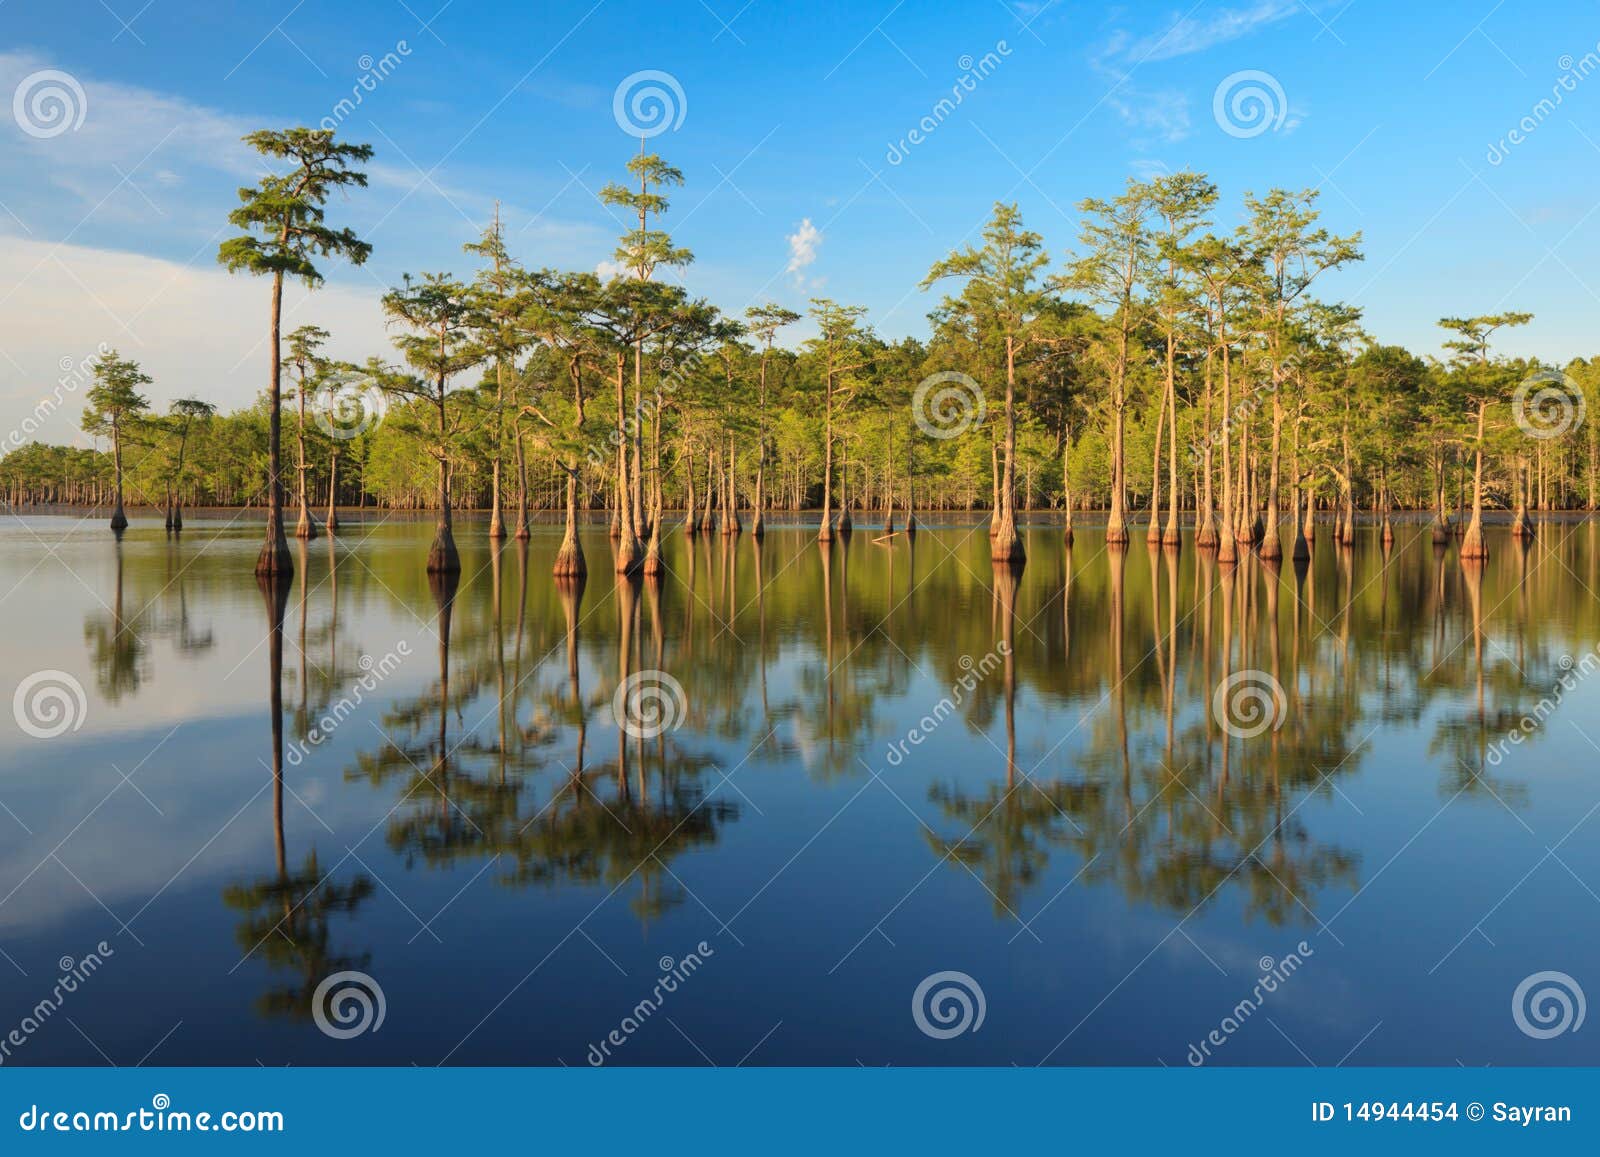 cypress trees in the swamp